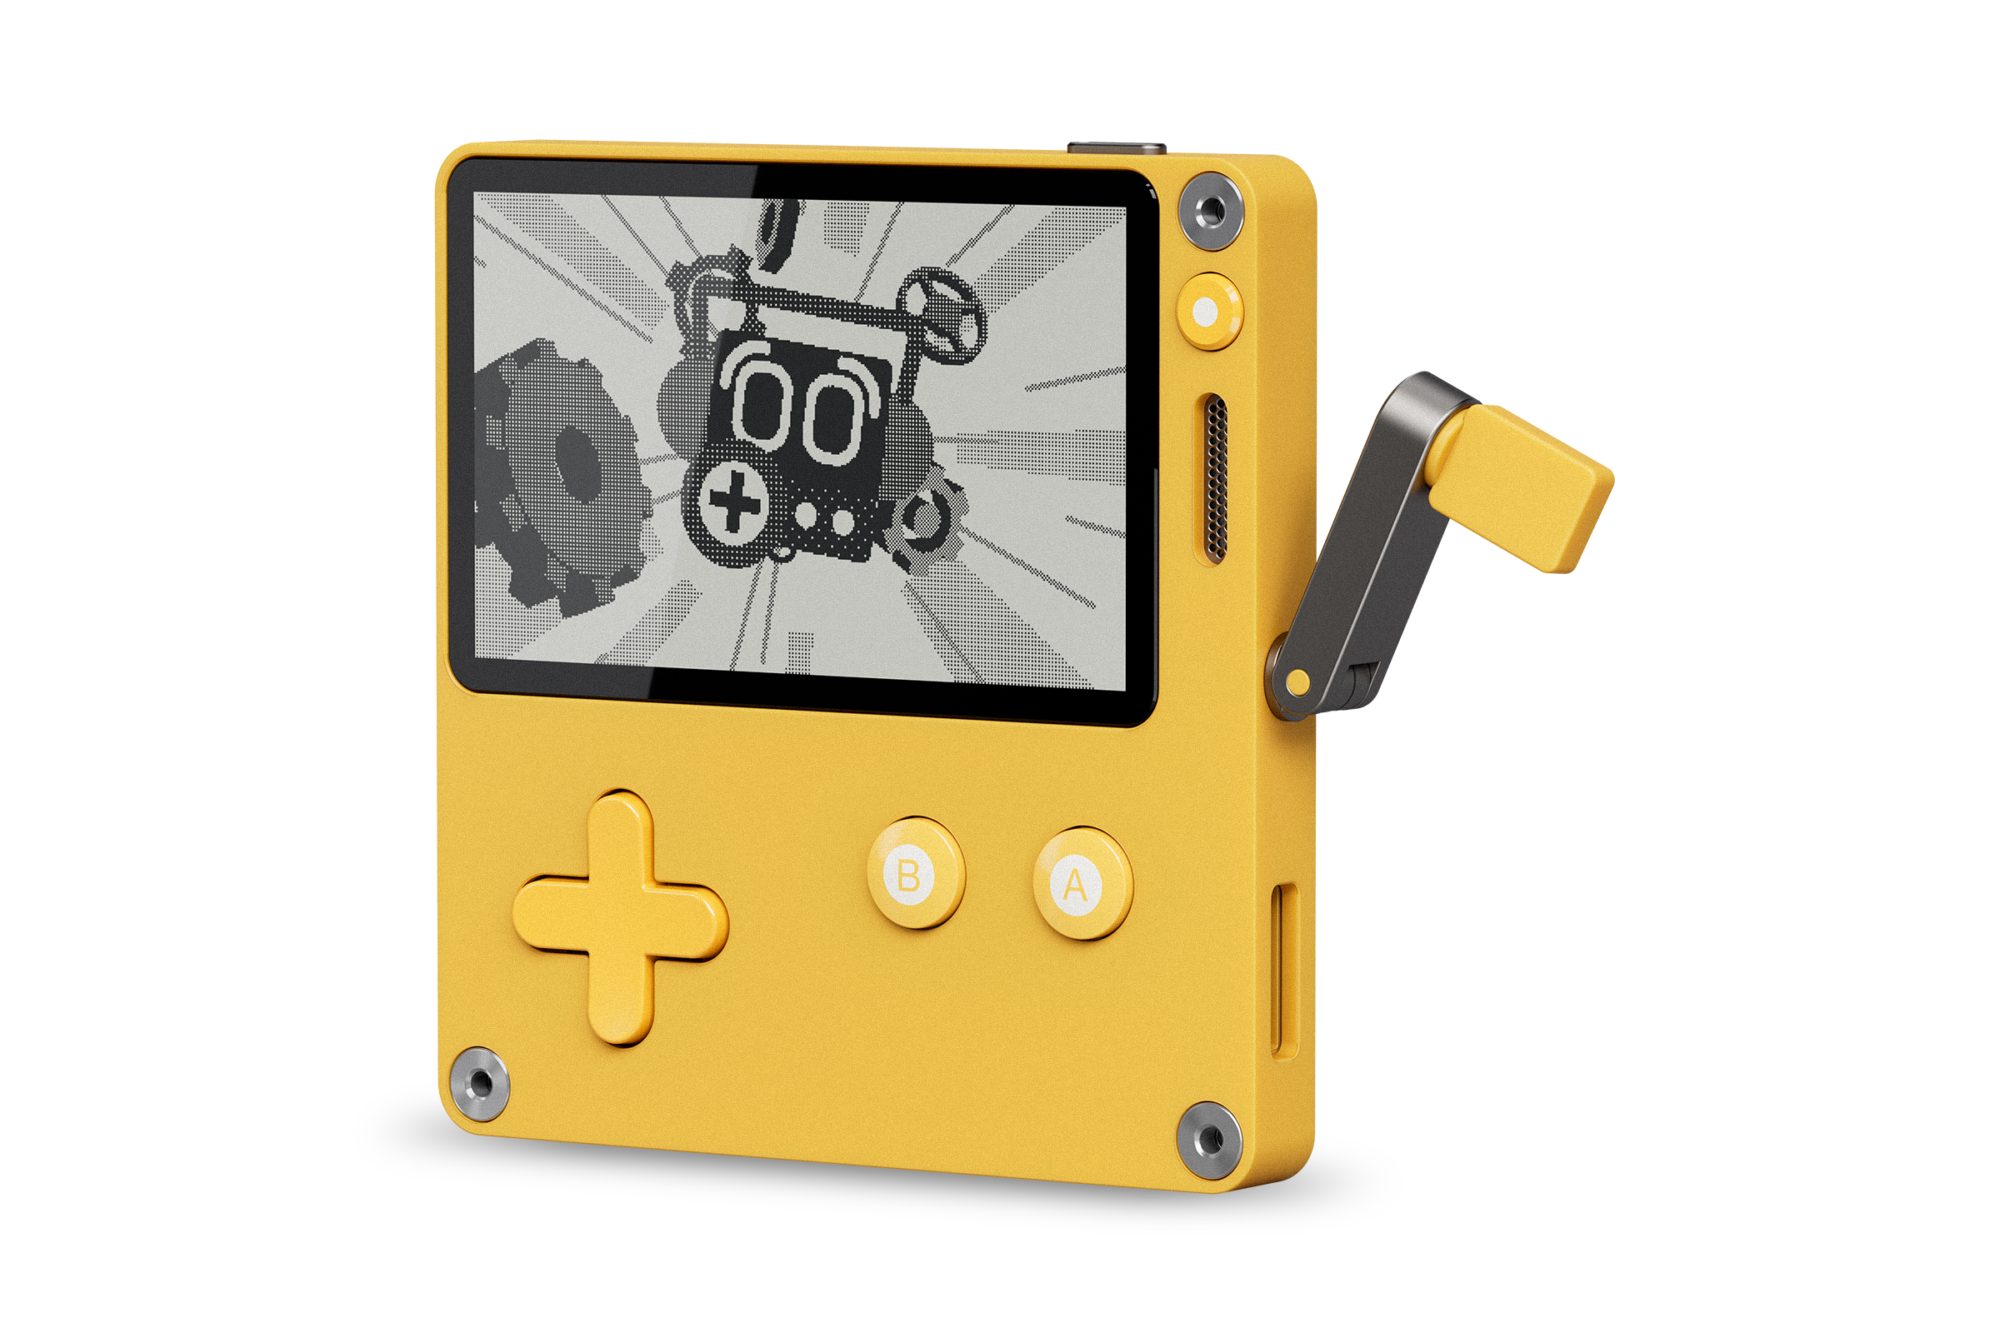 A promotional image taken from the Playdate media pack. It shows the playdate console with content on the screen and the crank control extended. The console is a cute yellow blocky (but thin) device. It looks like a really slim and mini version of a Game Boy Pocket, but with a crank on the side that you can turn.